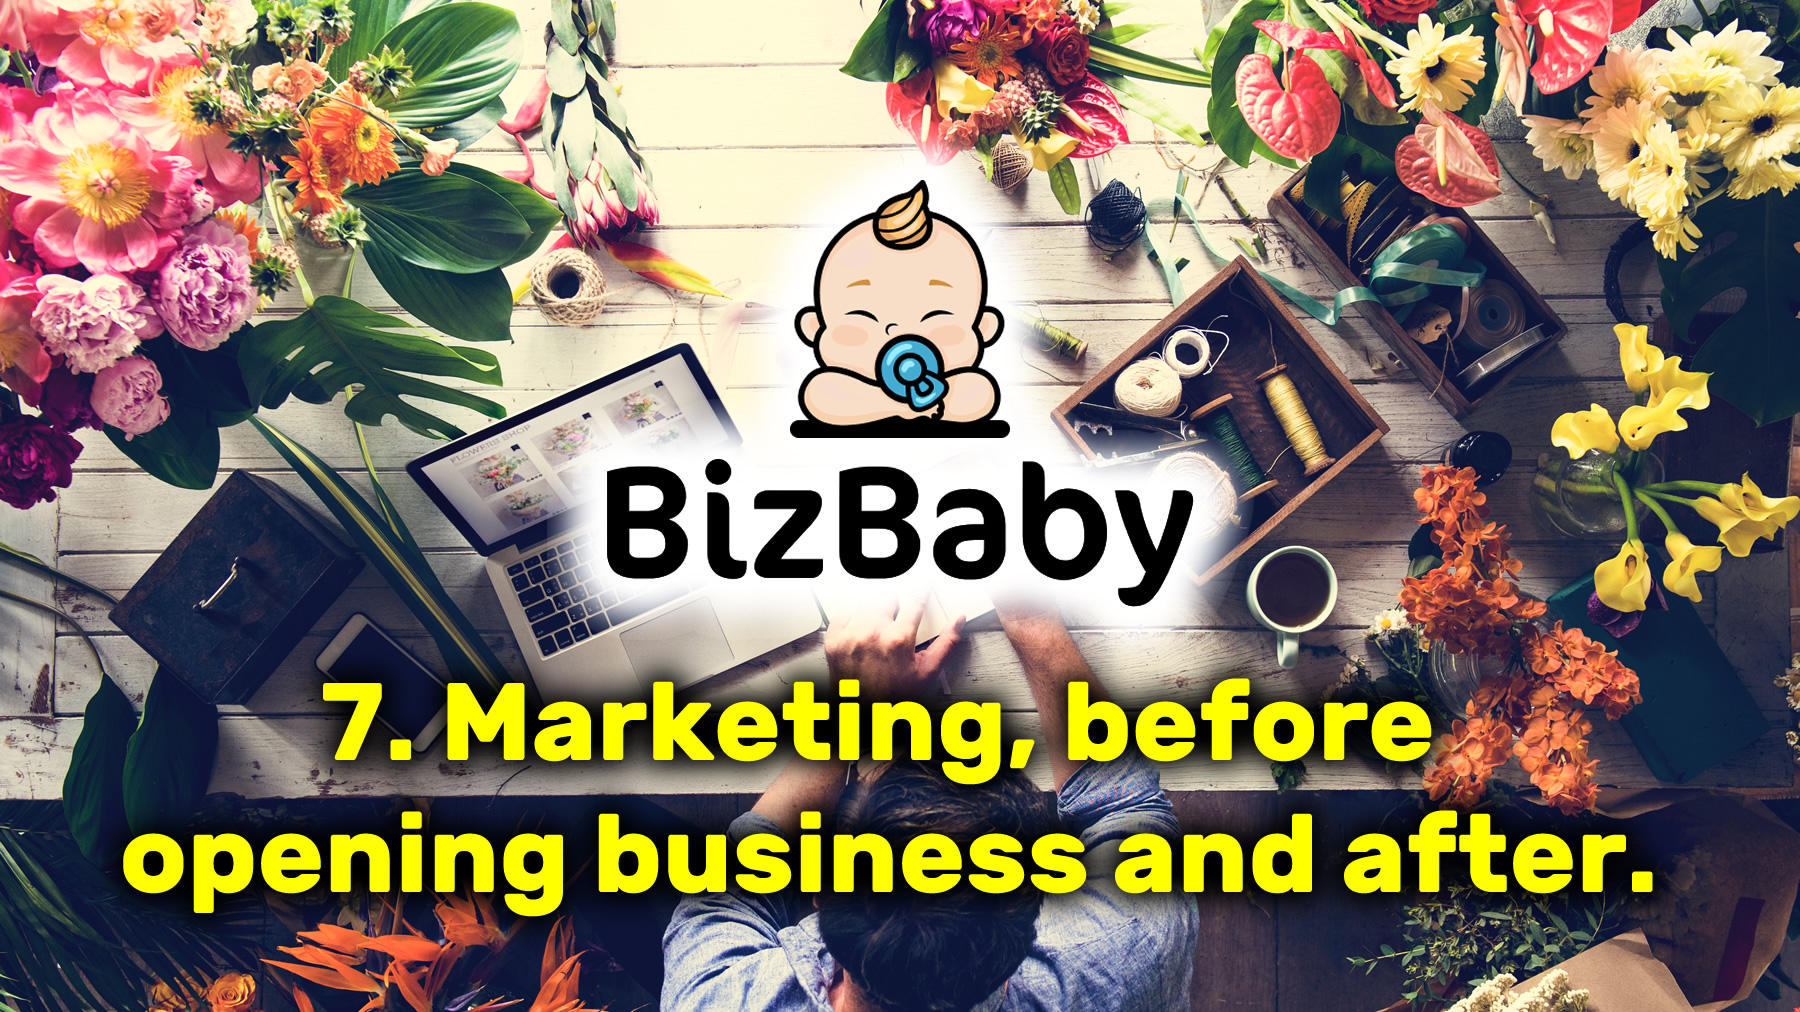 Marketing, before opening business and after